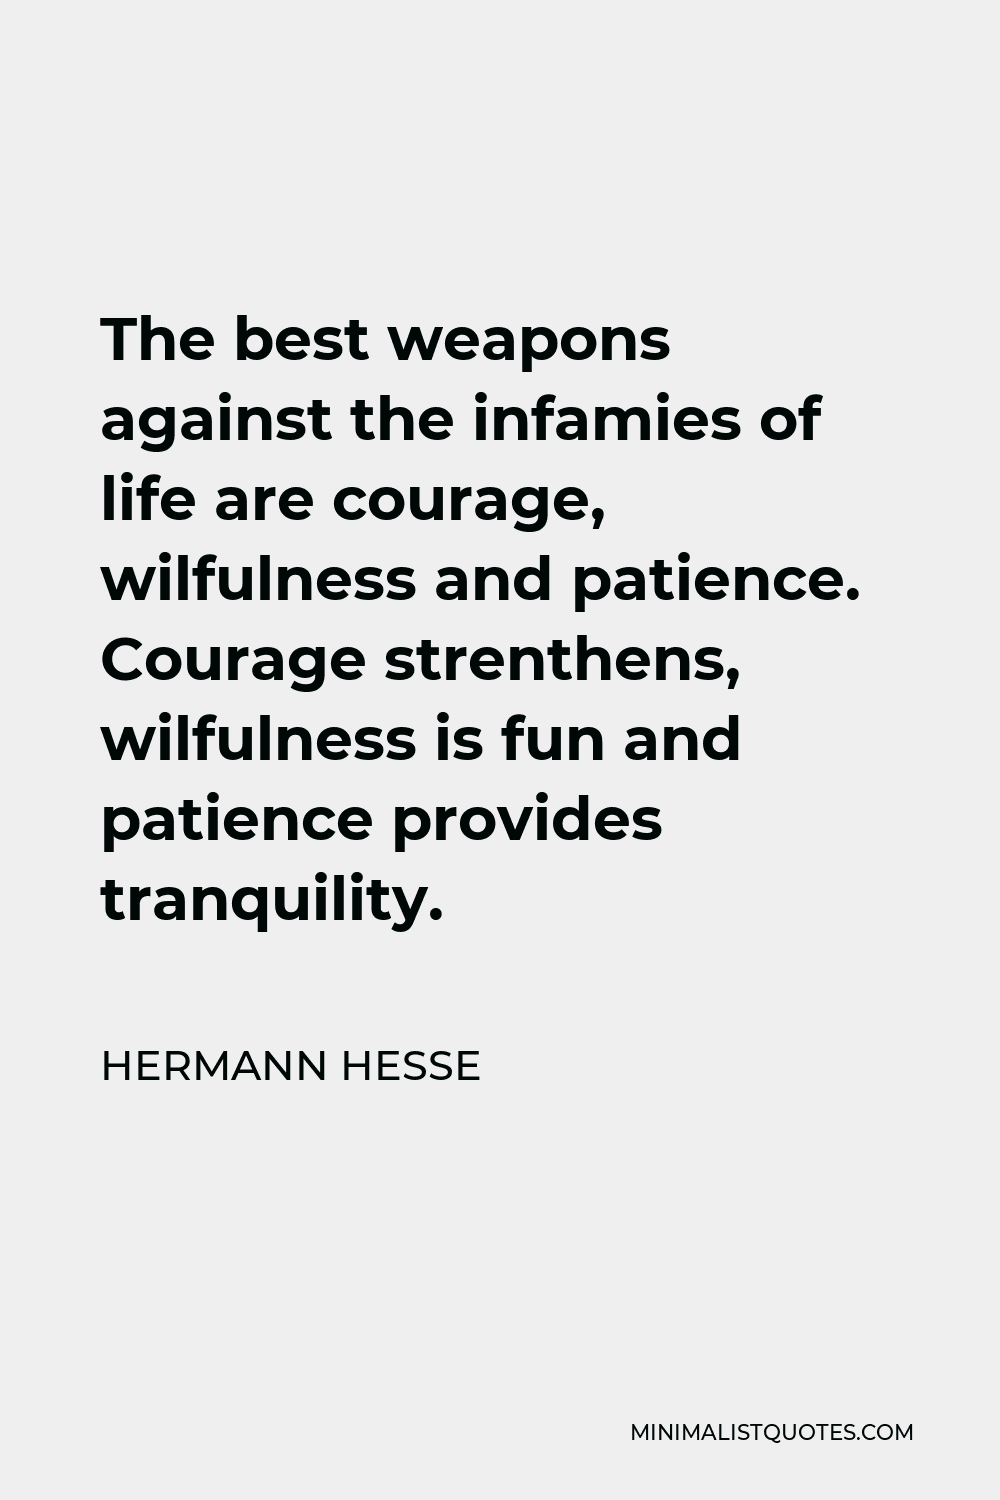 Hermann Hesse Quote - The best weapons against the infamies of life are courage, wilfulness and patience. Courage strenthens, wilfulness is fun and patience provides tranquility.